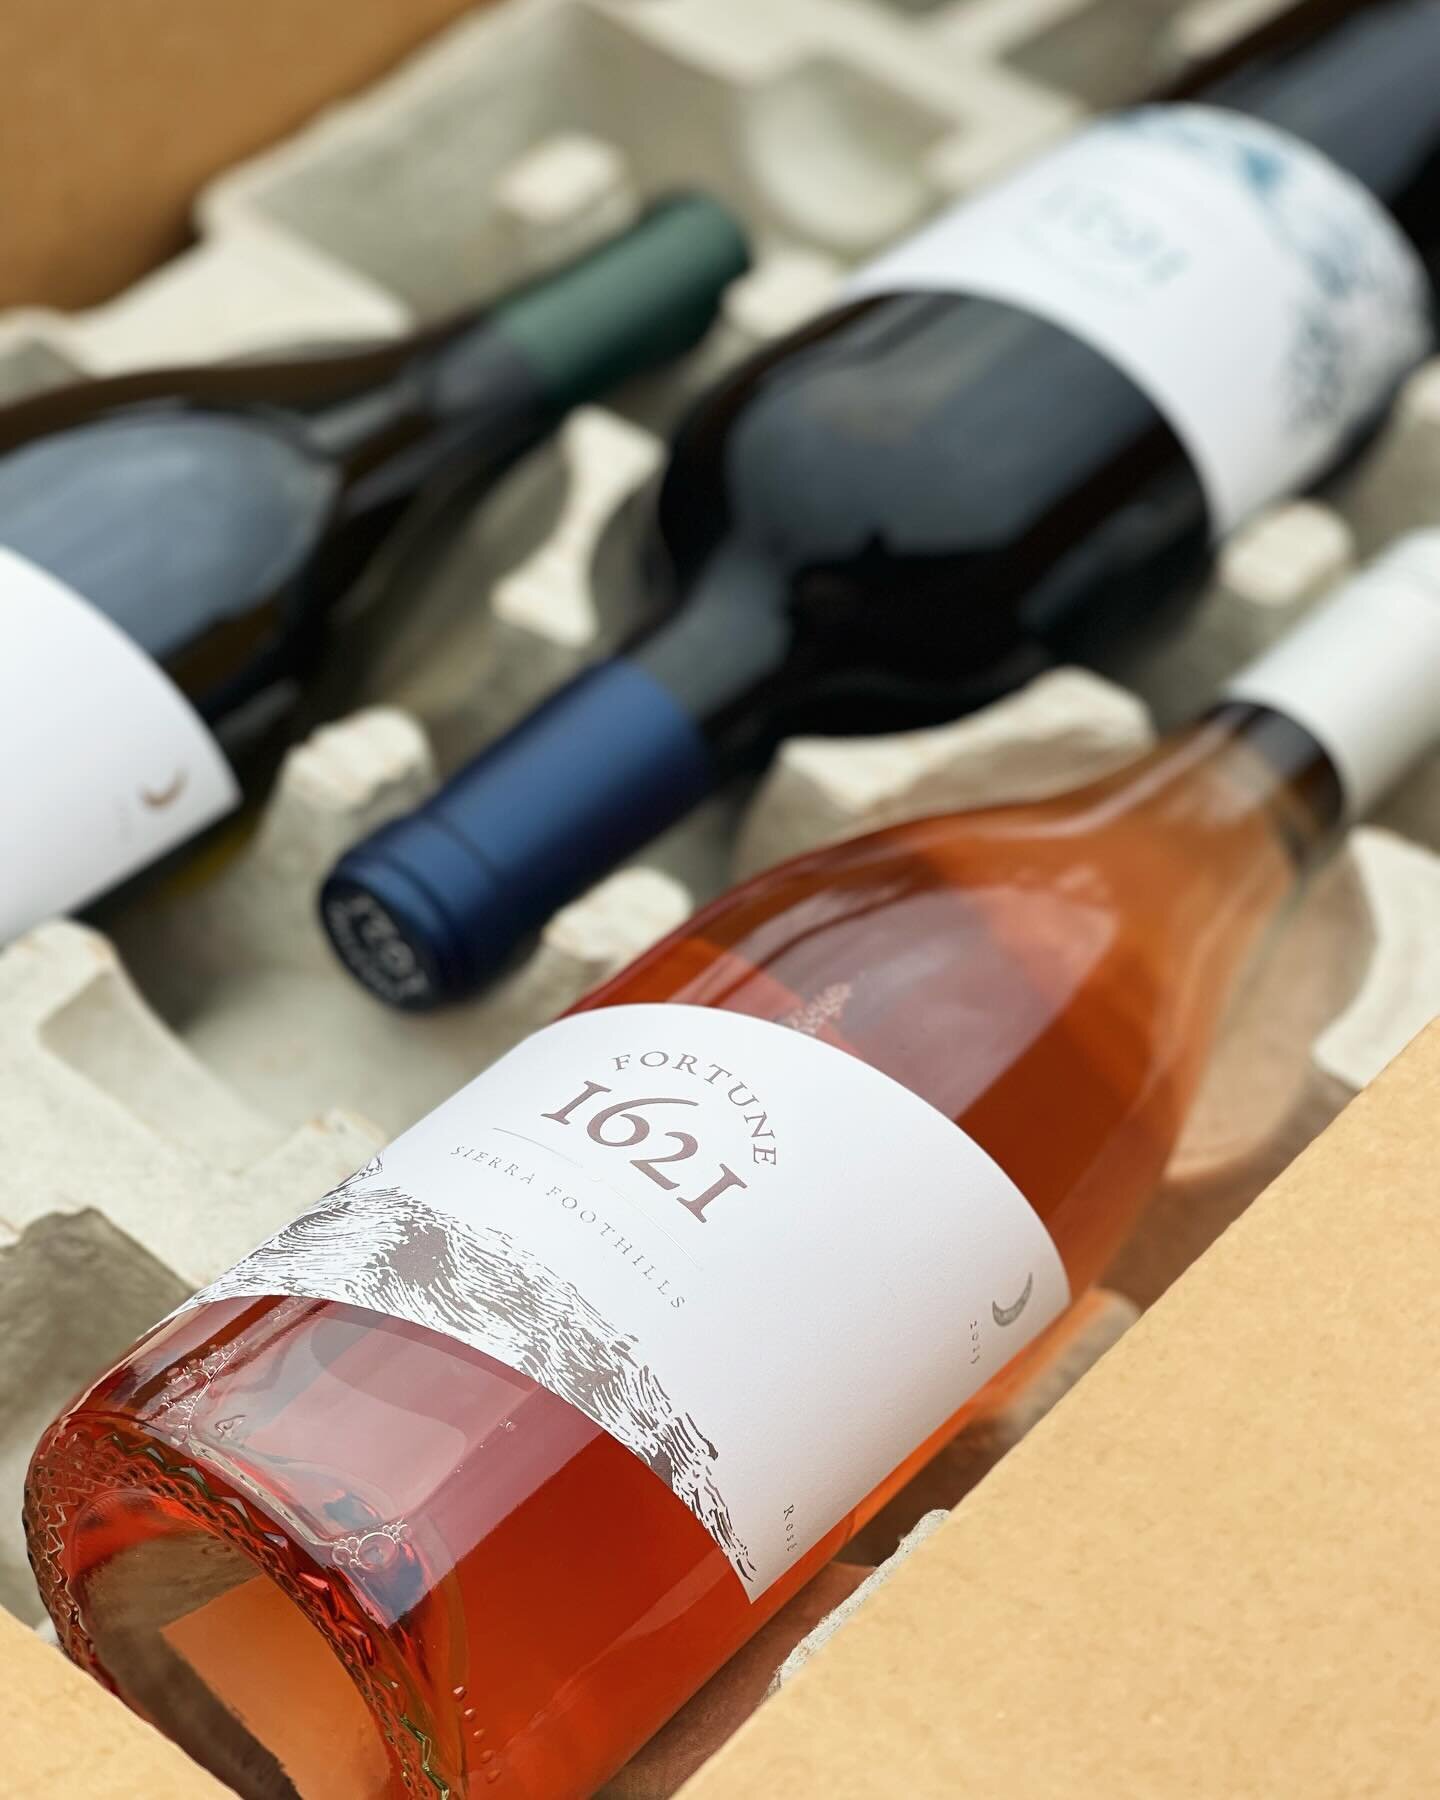 Have you placed your Fortune Trio order yet? This limited pack includes our Napa Valley Cabernet Sauvignon, Carneros Chardonnay and Sierra Foothills Rose of Syrah. Get them before they&rsquo;re gone!